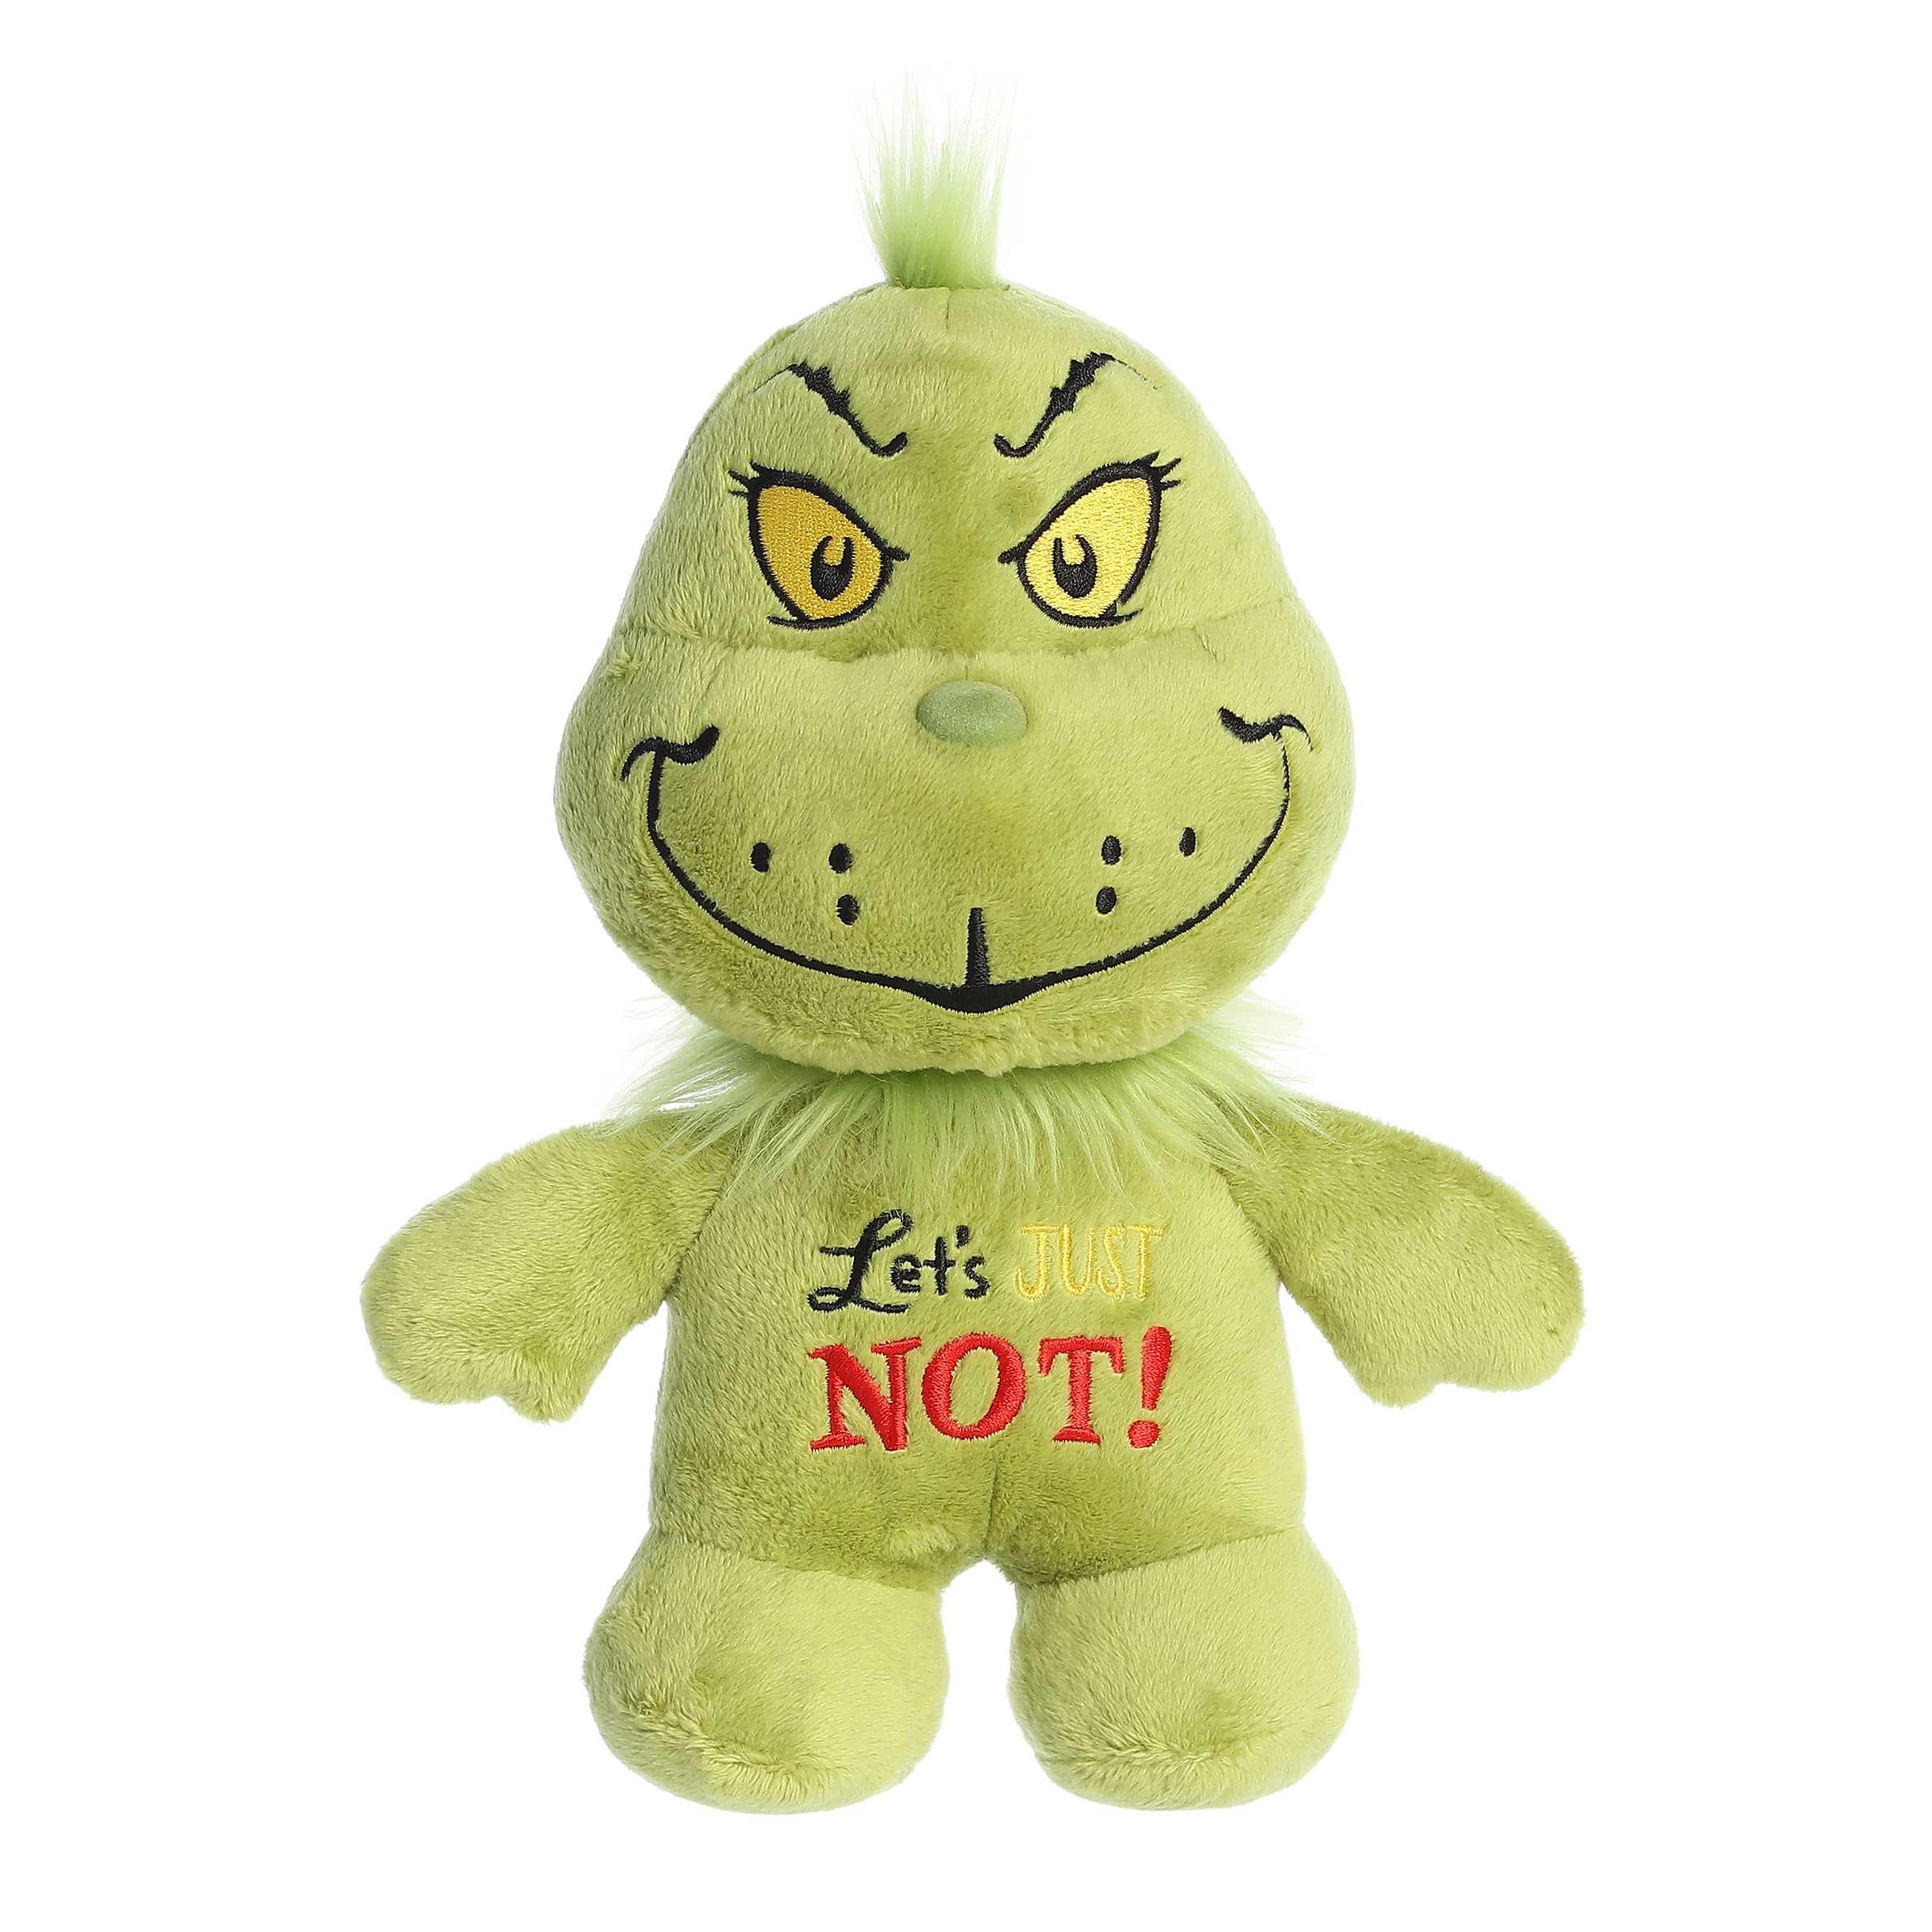 Playful 'Seuss Wisdom Grinch Plush' with a sneer and witty quote, capturing the timeless charm and humor of Dr. Seuss.